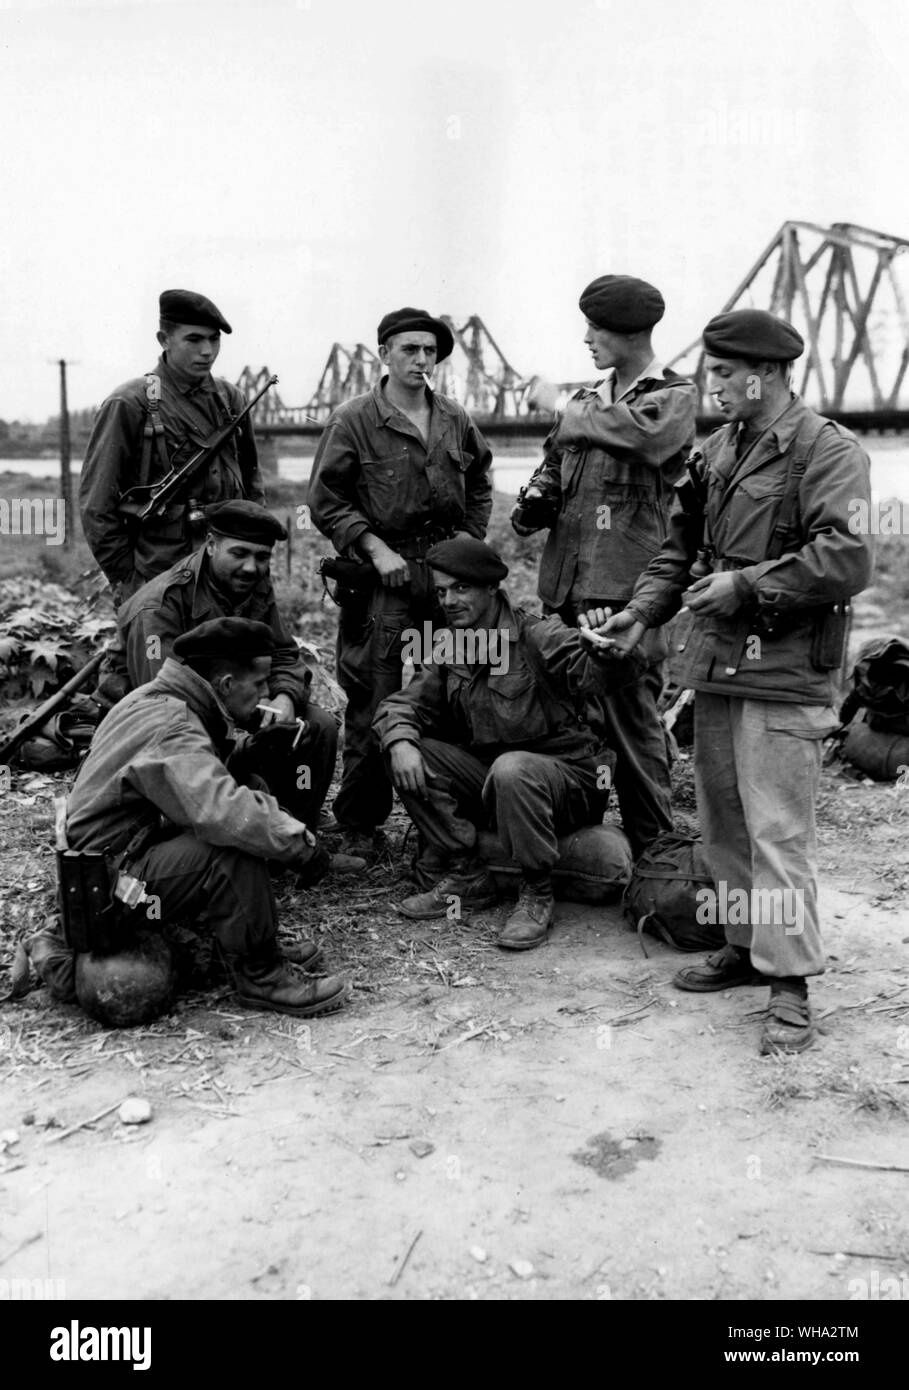 Paratroopers of the French Foreign Legion awaiting transport by the red river bridge near Hanoi in Northern Indo-China, March 1st. 1951 on their way home from patrol. Stock Photo